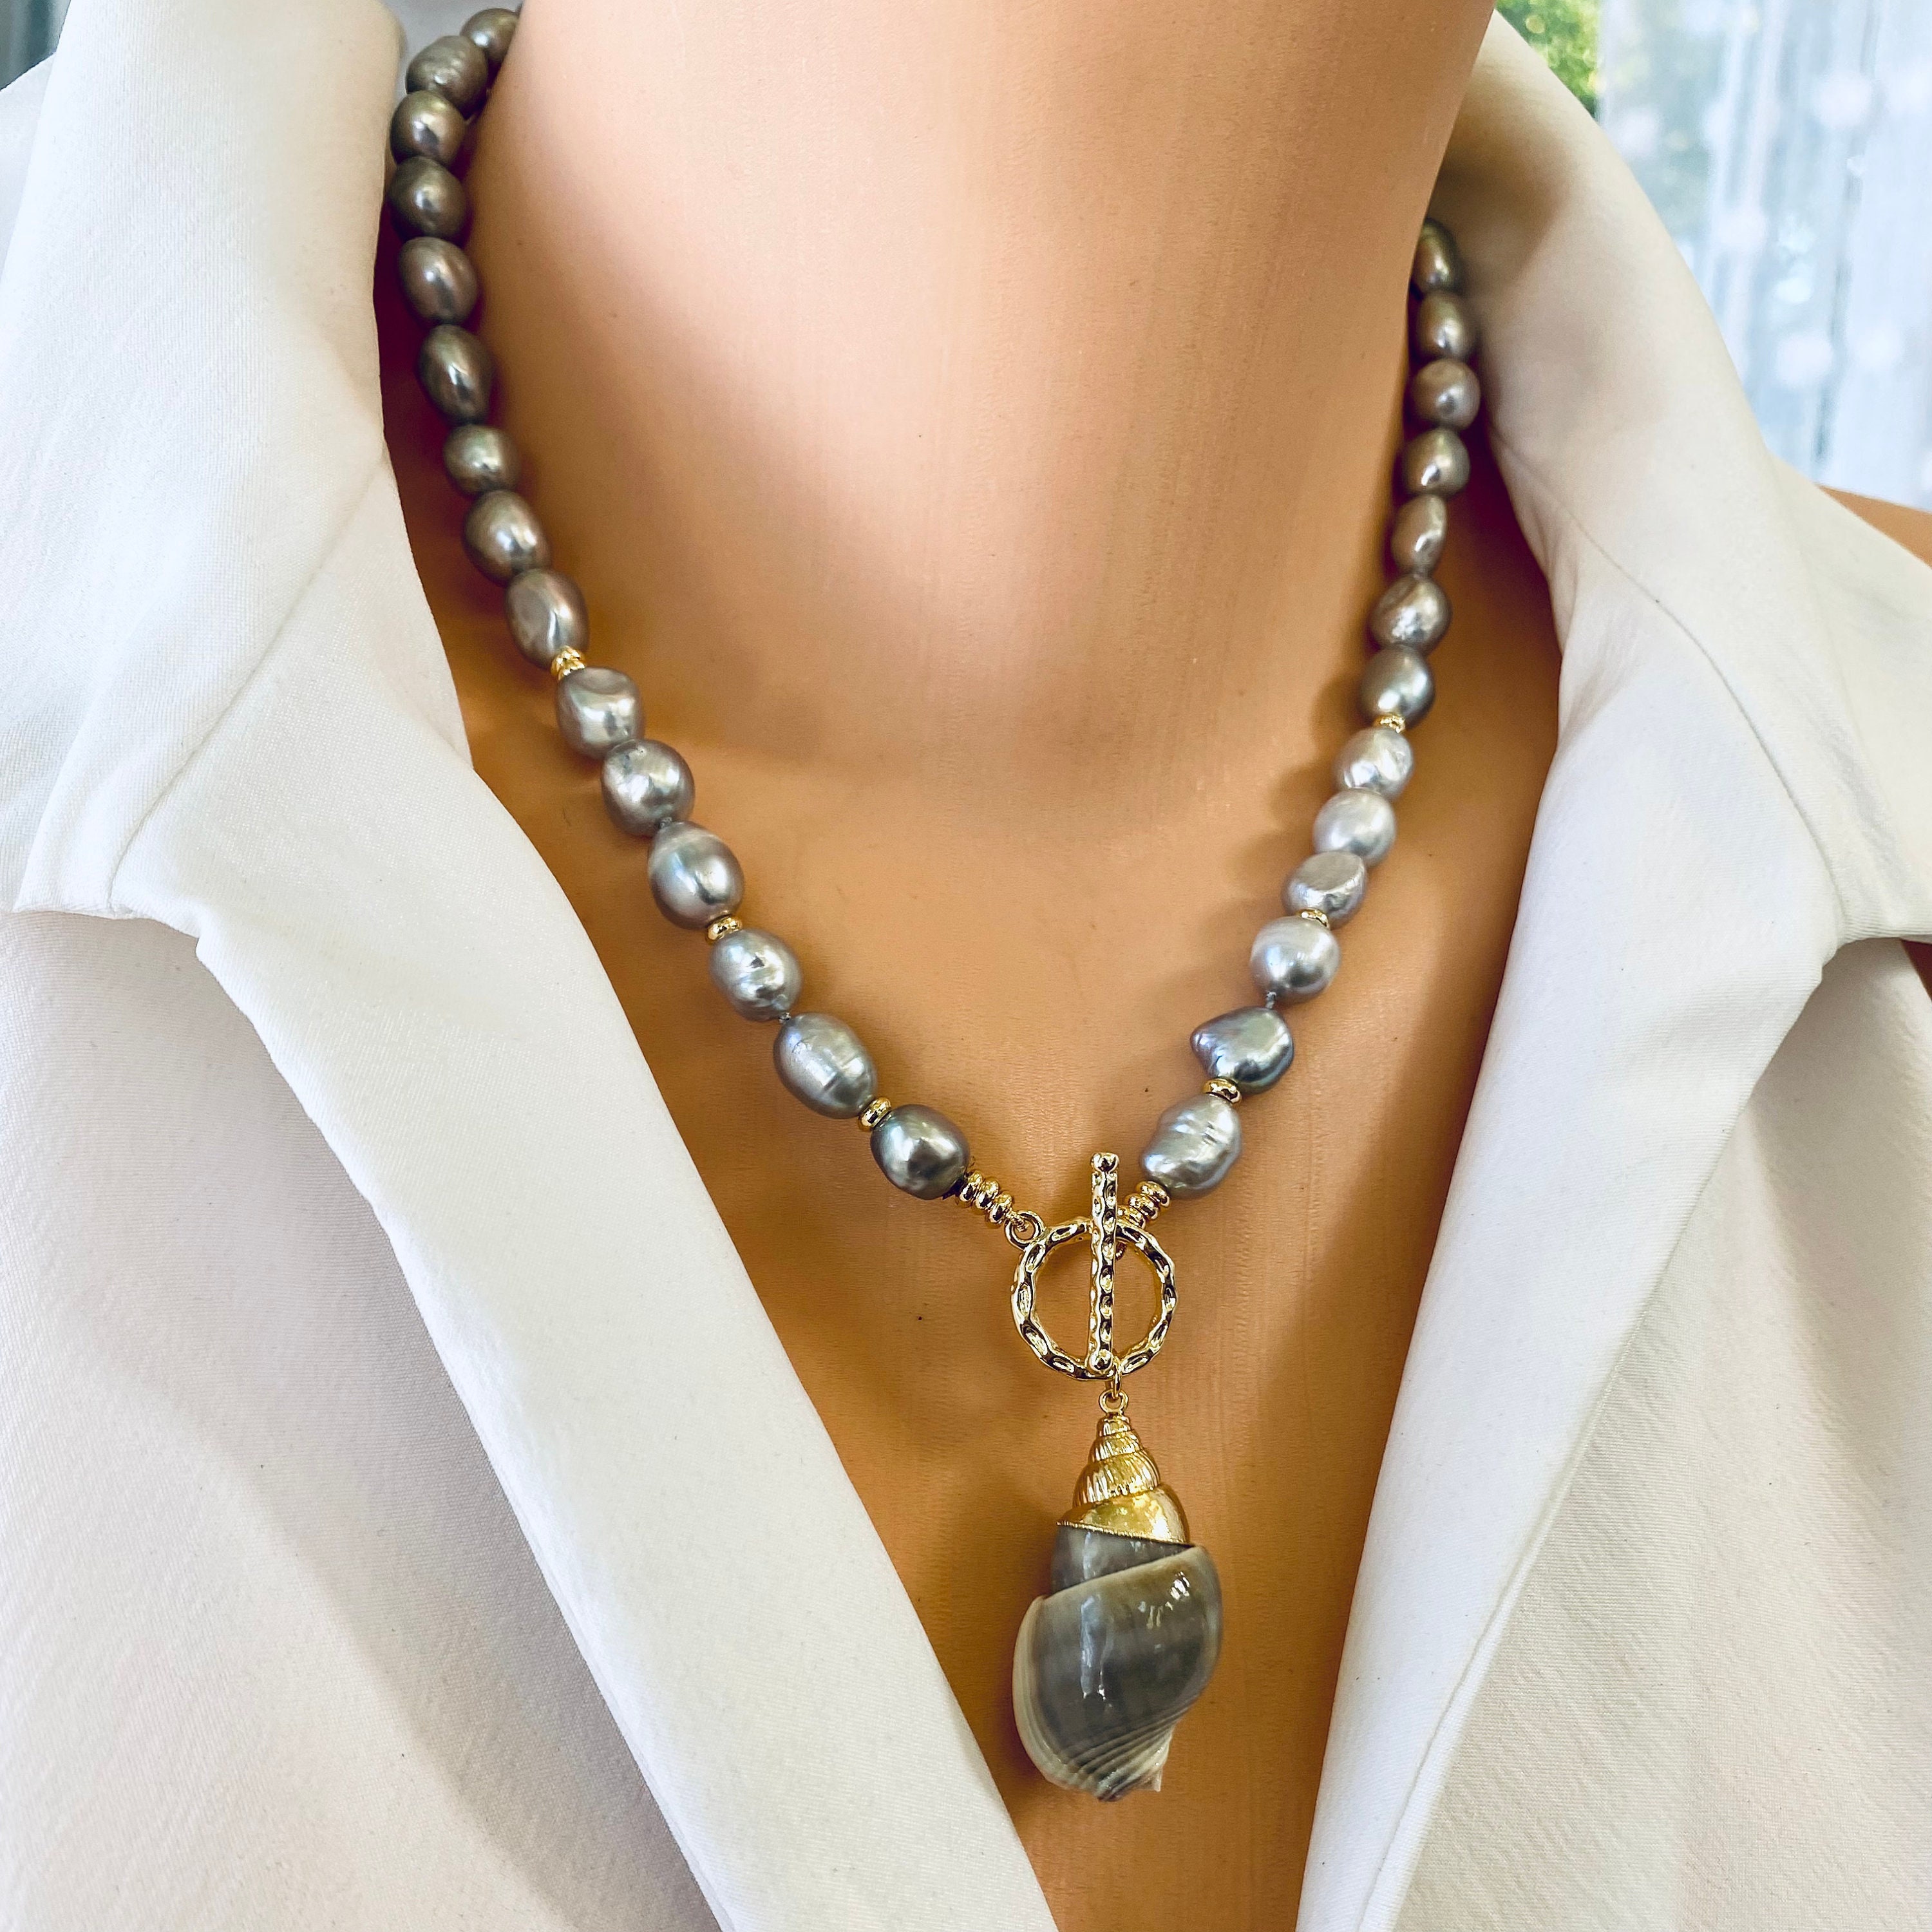 Real Pearl Shell Shell Pendant Necklace For Women Black Rope, Stainless  Steel, Sea Animal Design Perfect For Summer Holidays And Beach Jewelry Non  Tanish From Jaylenbrown, $11.7